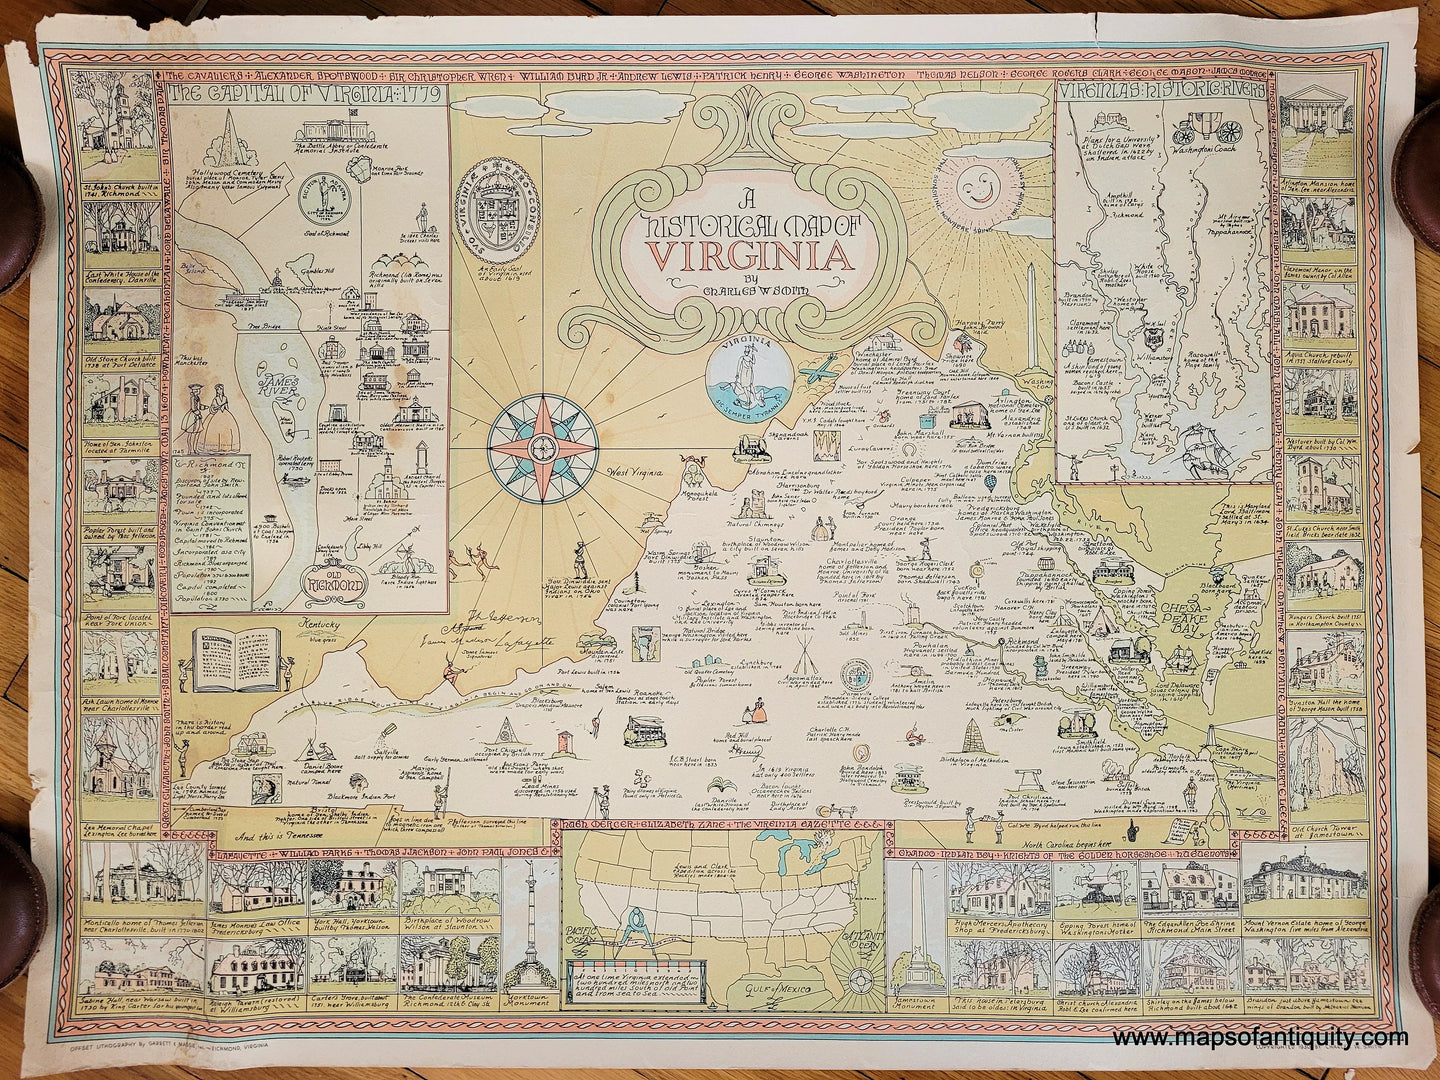 Genuine-Antique-Pictorial-Map-A-Historical-Map-of-Virginia-1930-Charles-W-Smith-Maps-Of-Antiquity